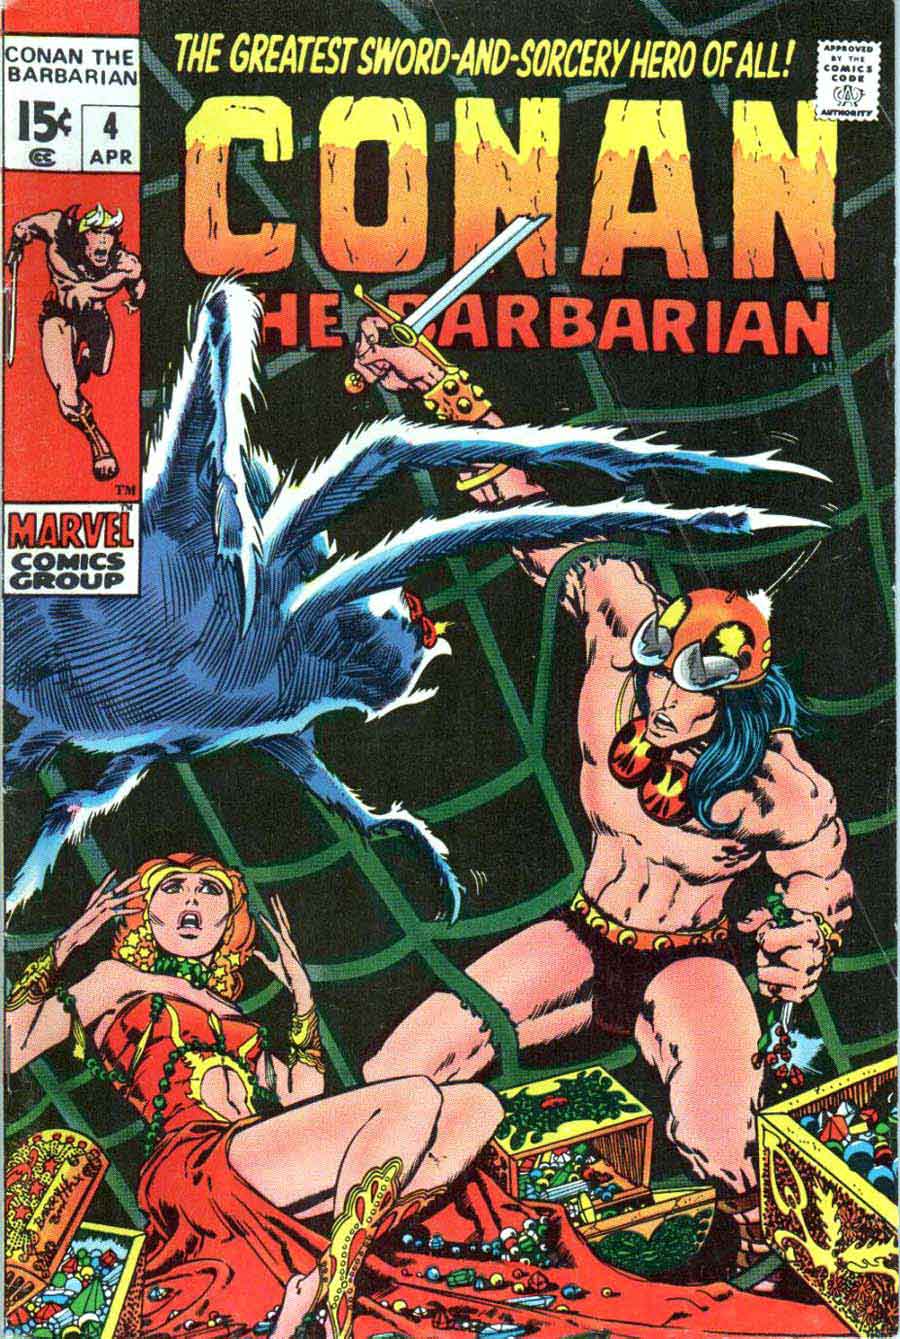 Conan the Barbarian v1 #4 marvel comic book cover art by Barry Windsor Smith